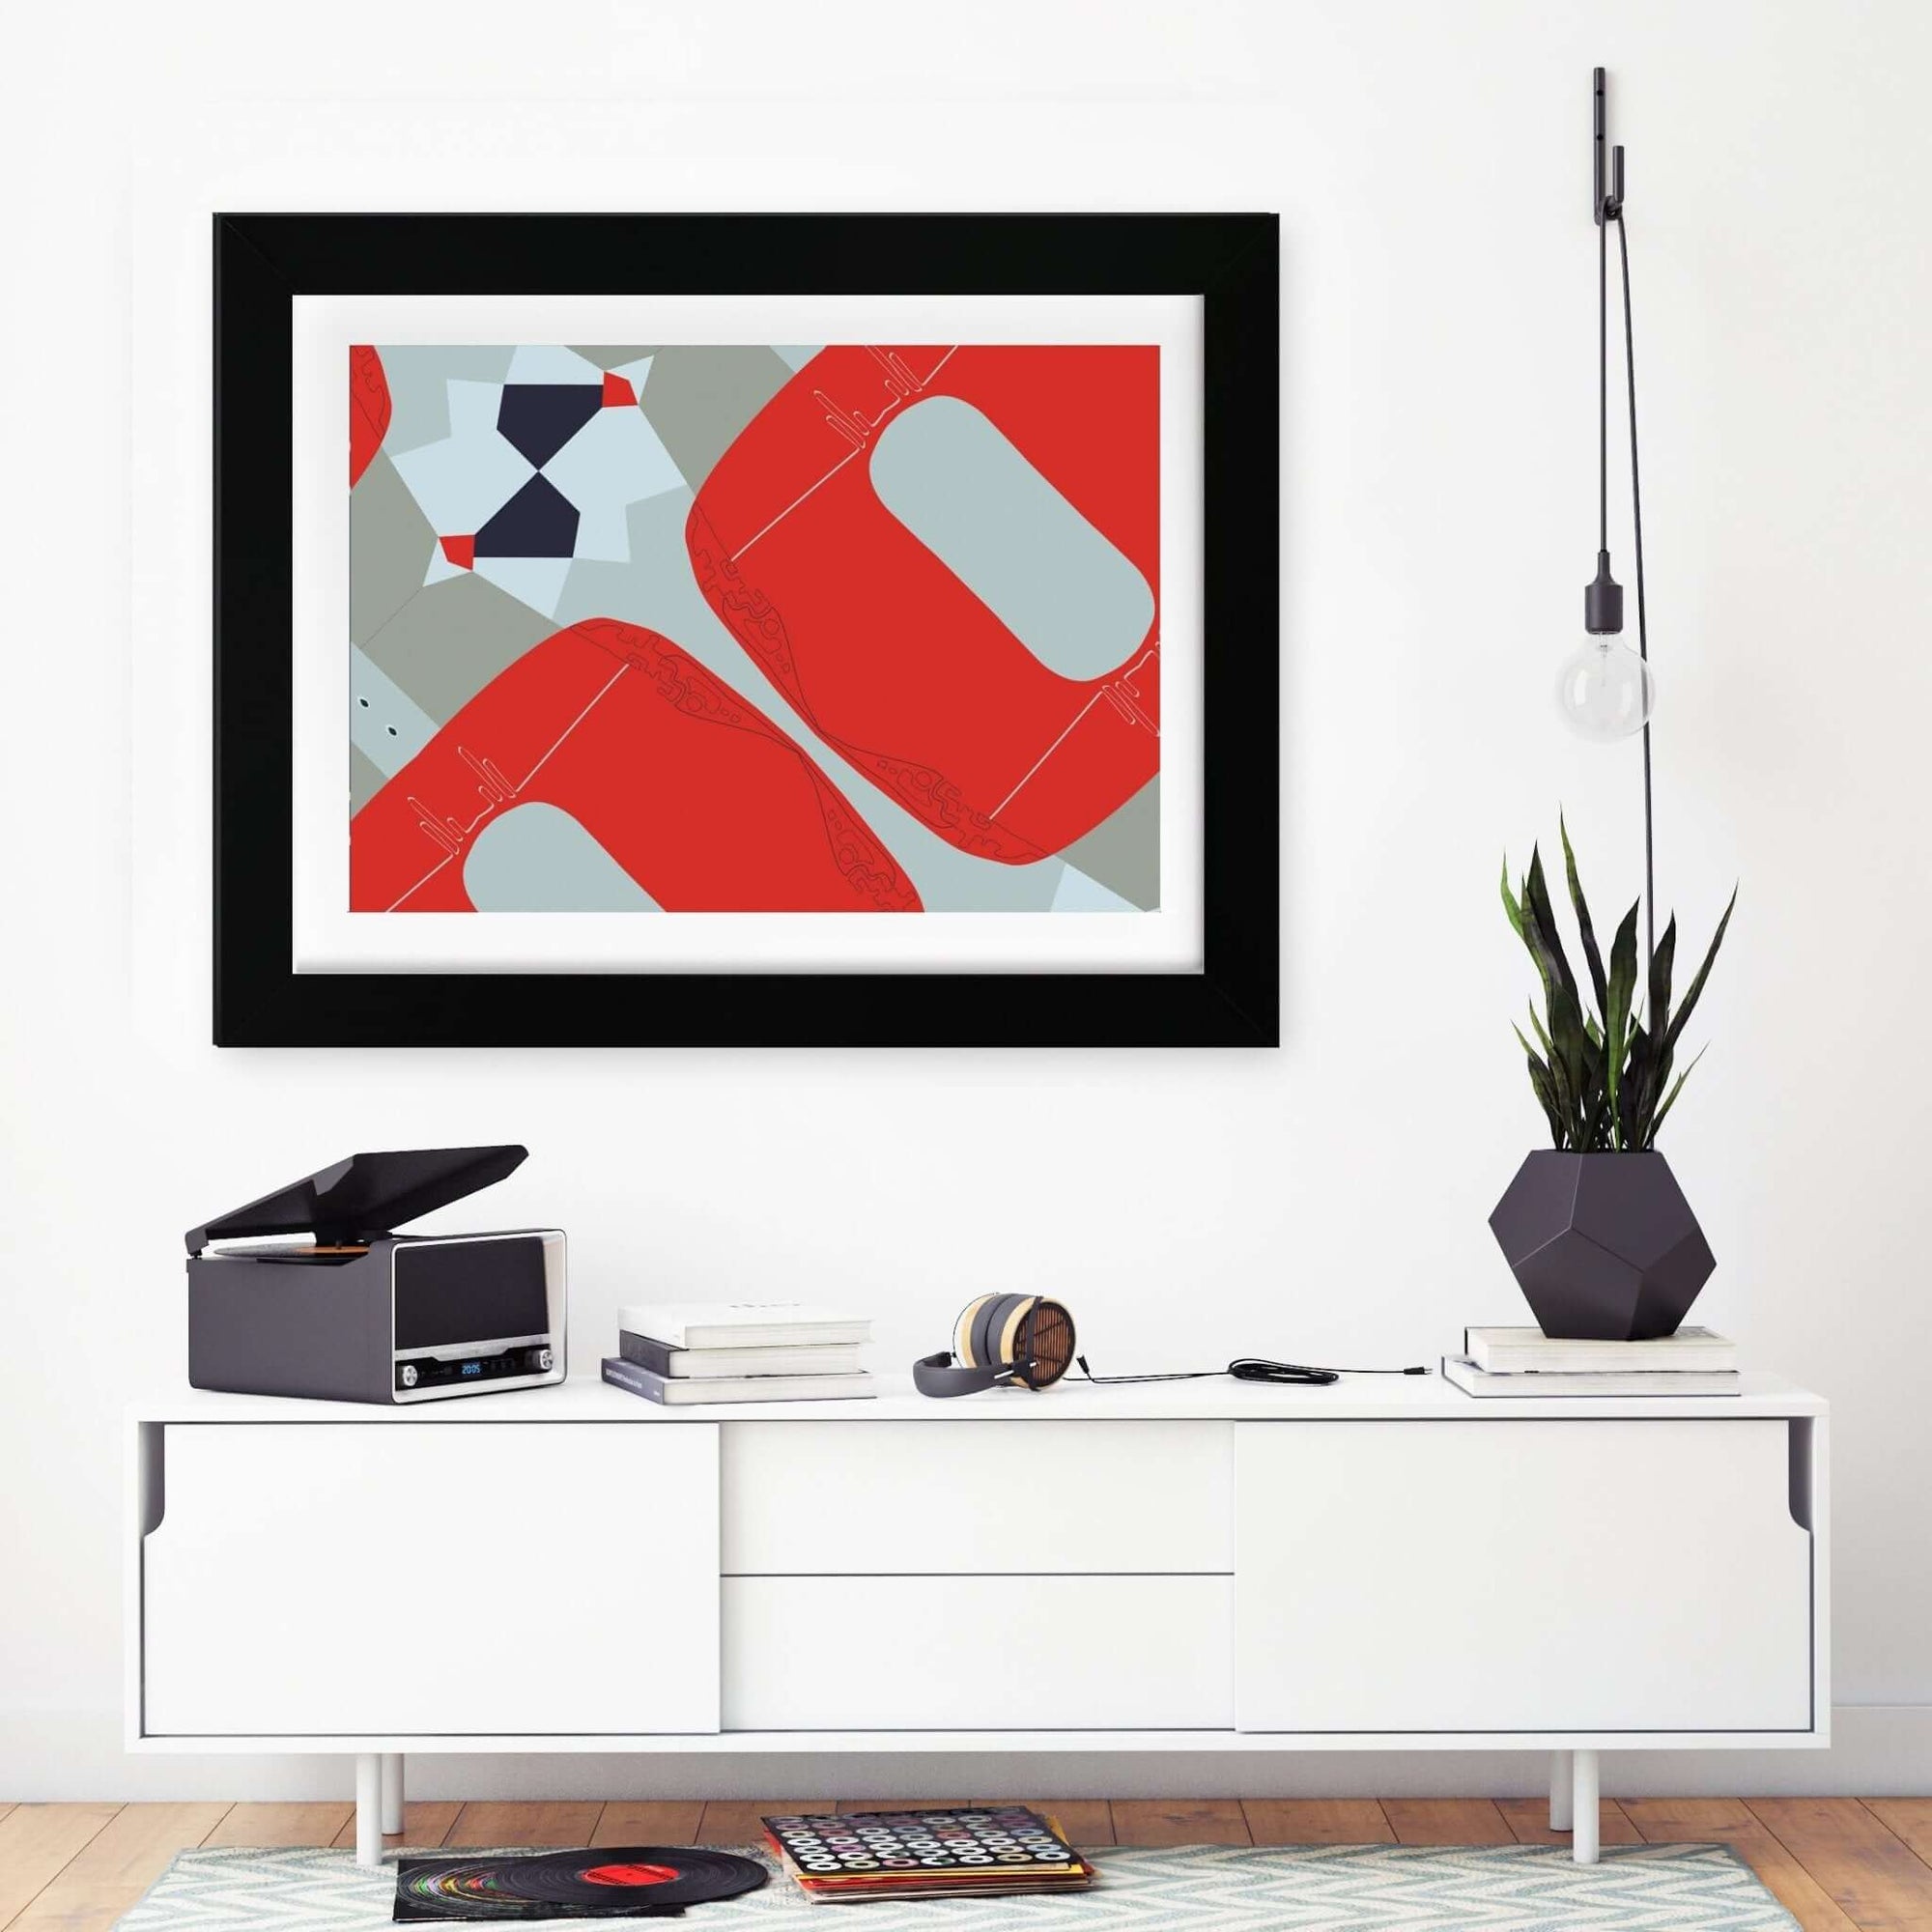 So Fine Luxurious Print - Always Ask Why - Red  Blue - 24" x 30" inches - Far From Timid